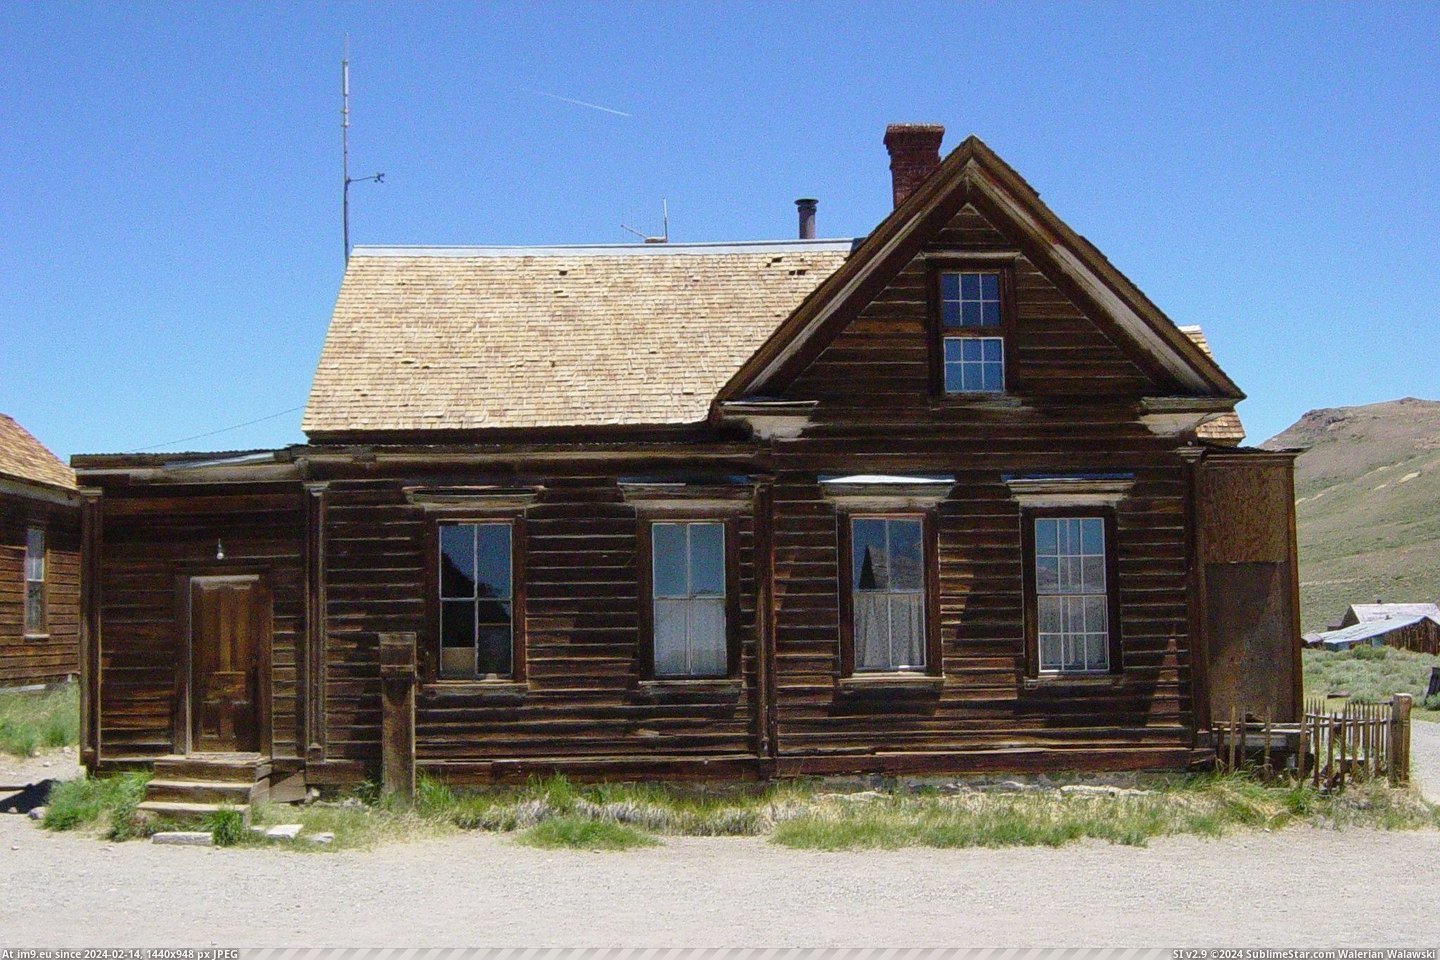 #California #James #Cain #Bodie #Residence James S. Cain Residence In Bodie, California Pic. (Obraz z album Bodie - a ghost town in Eastern California))